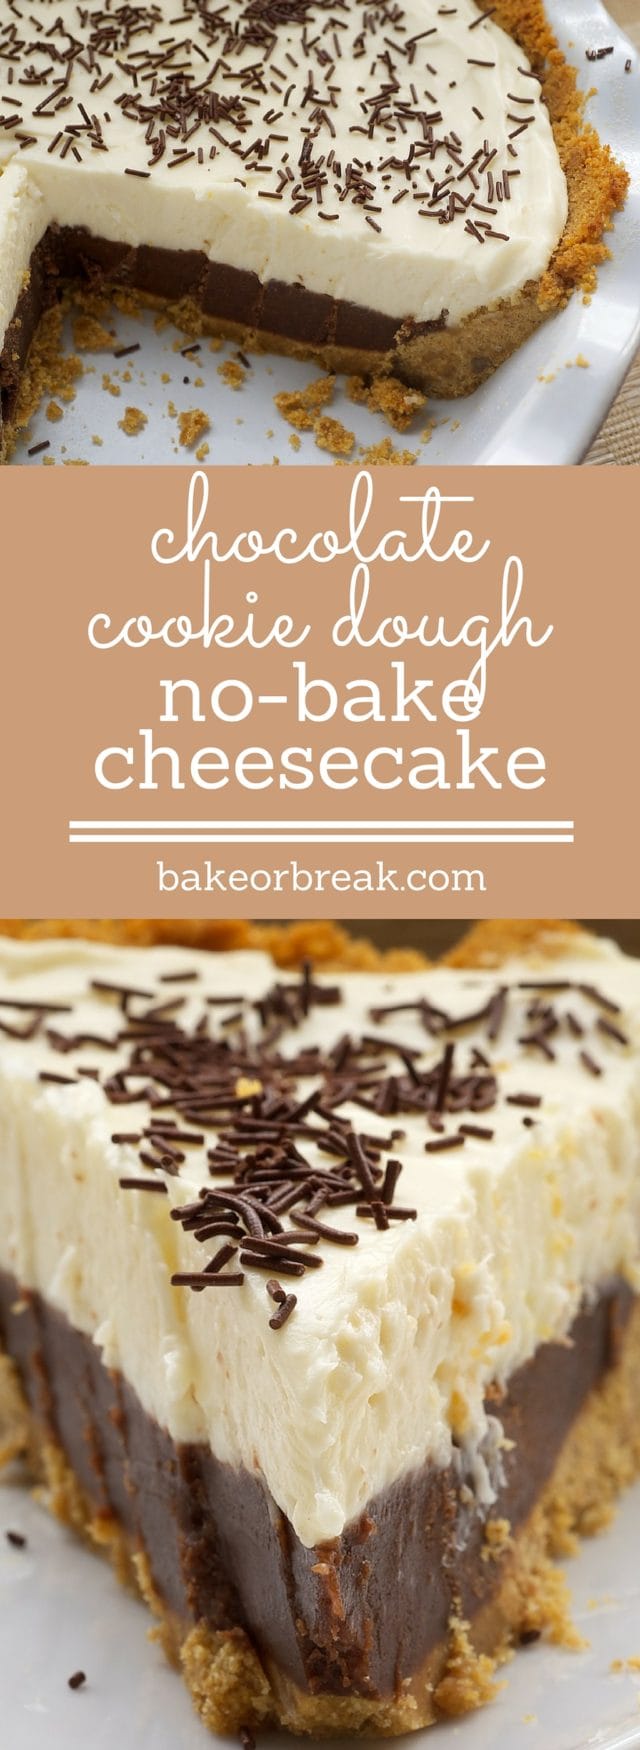 Cookie dough no bake cheesecake with graham cracker crust, and chocolate sprinkles on top.